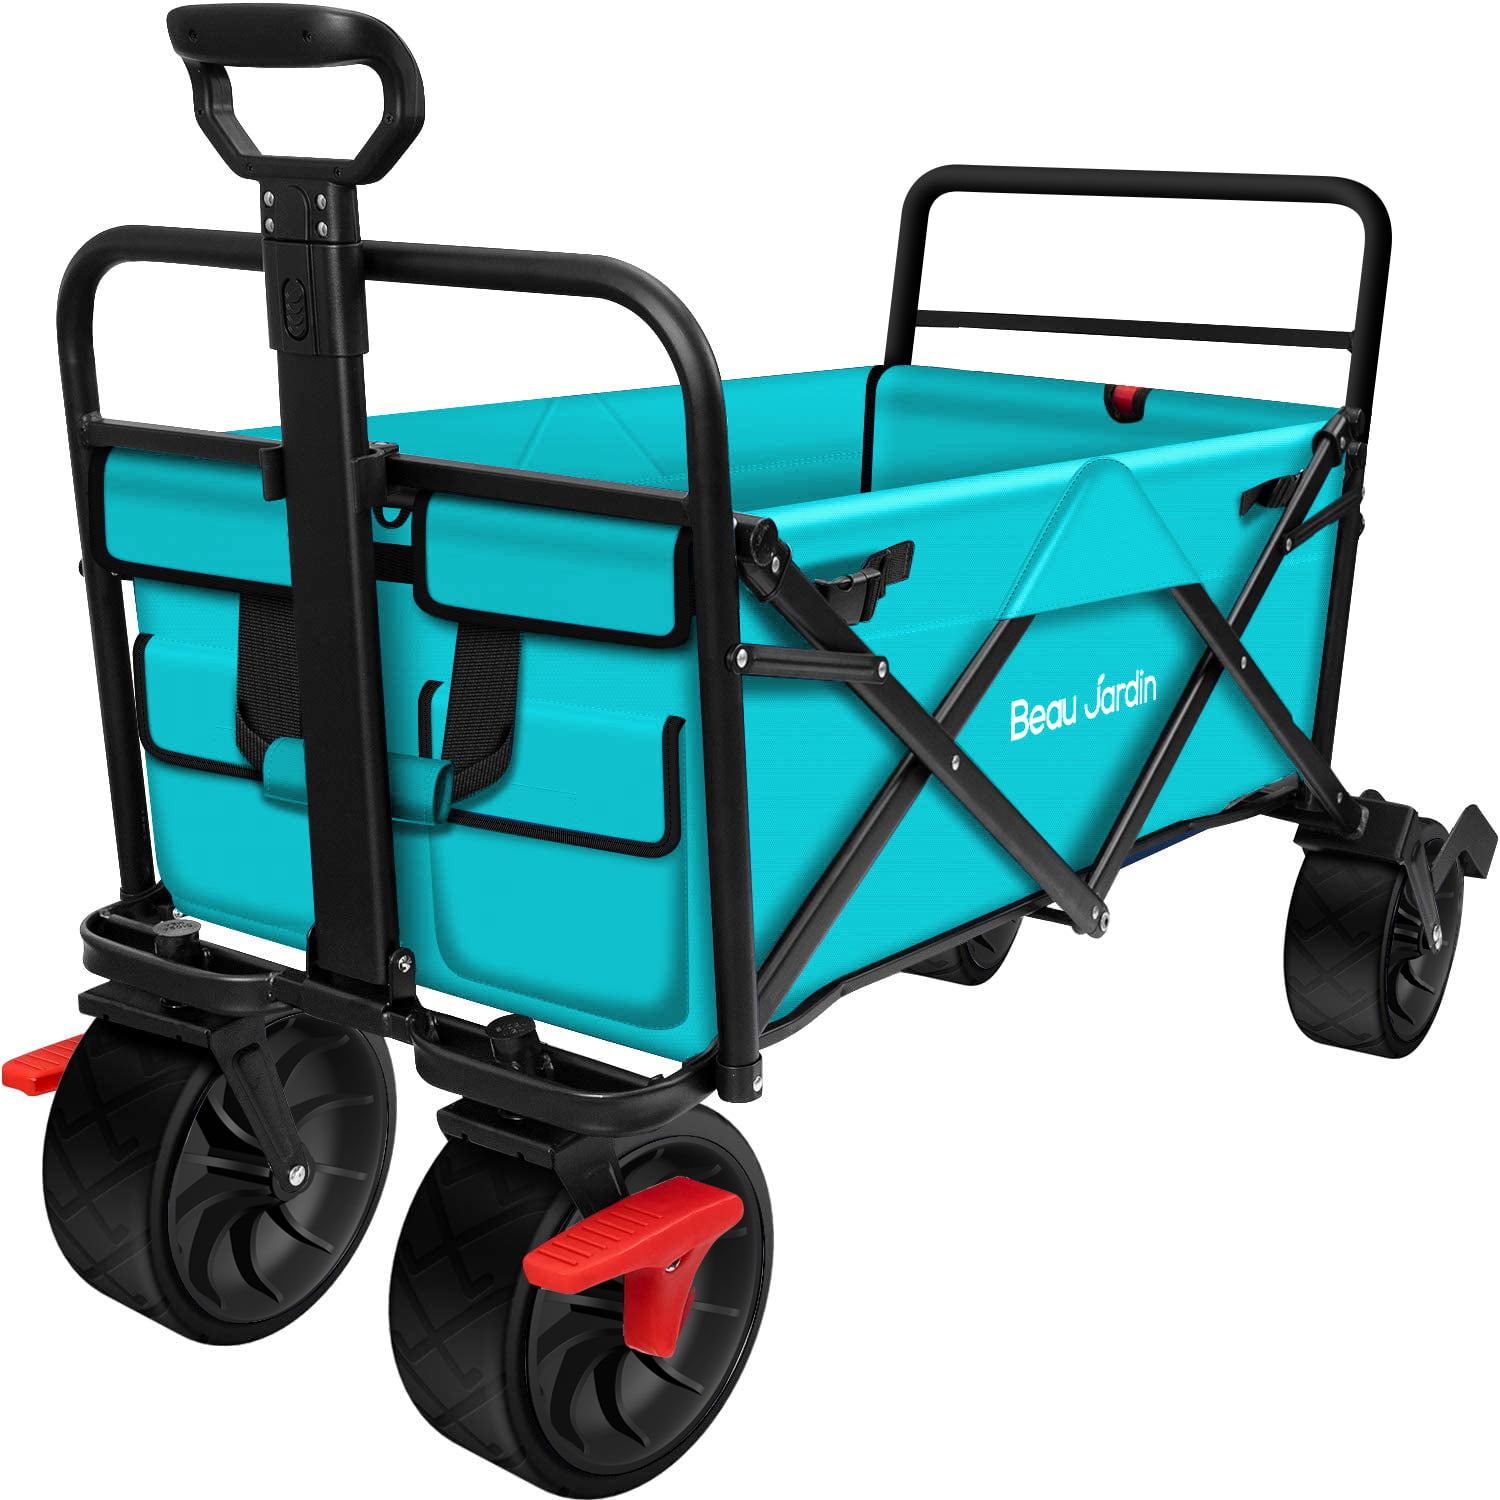 folding-wagon-cart-with-1-nylon-net-2-straps-canopy-collapsible-utility